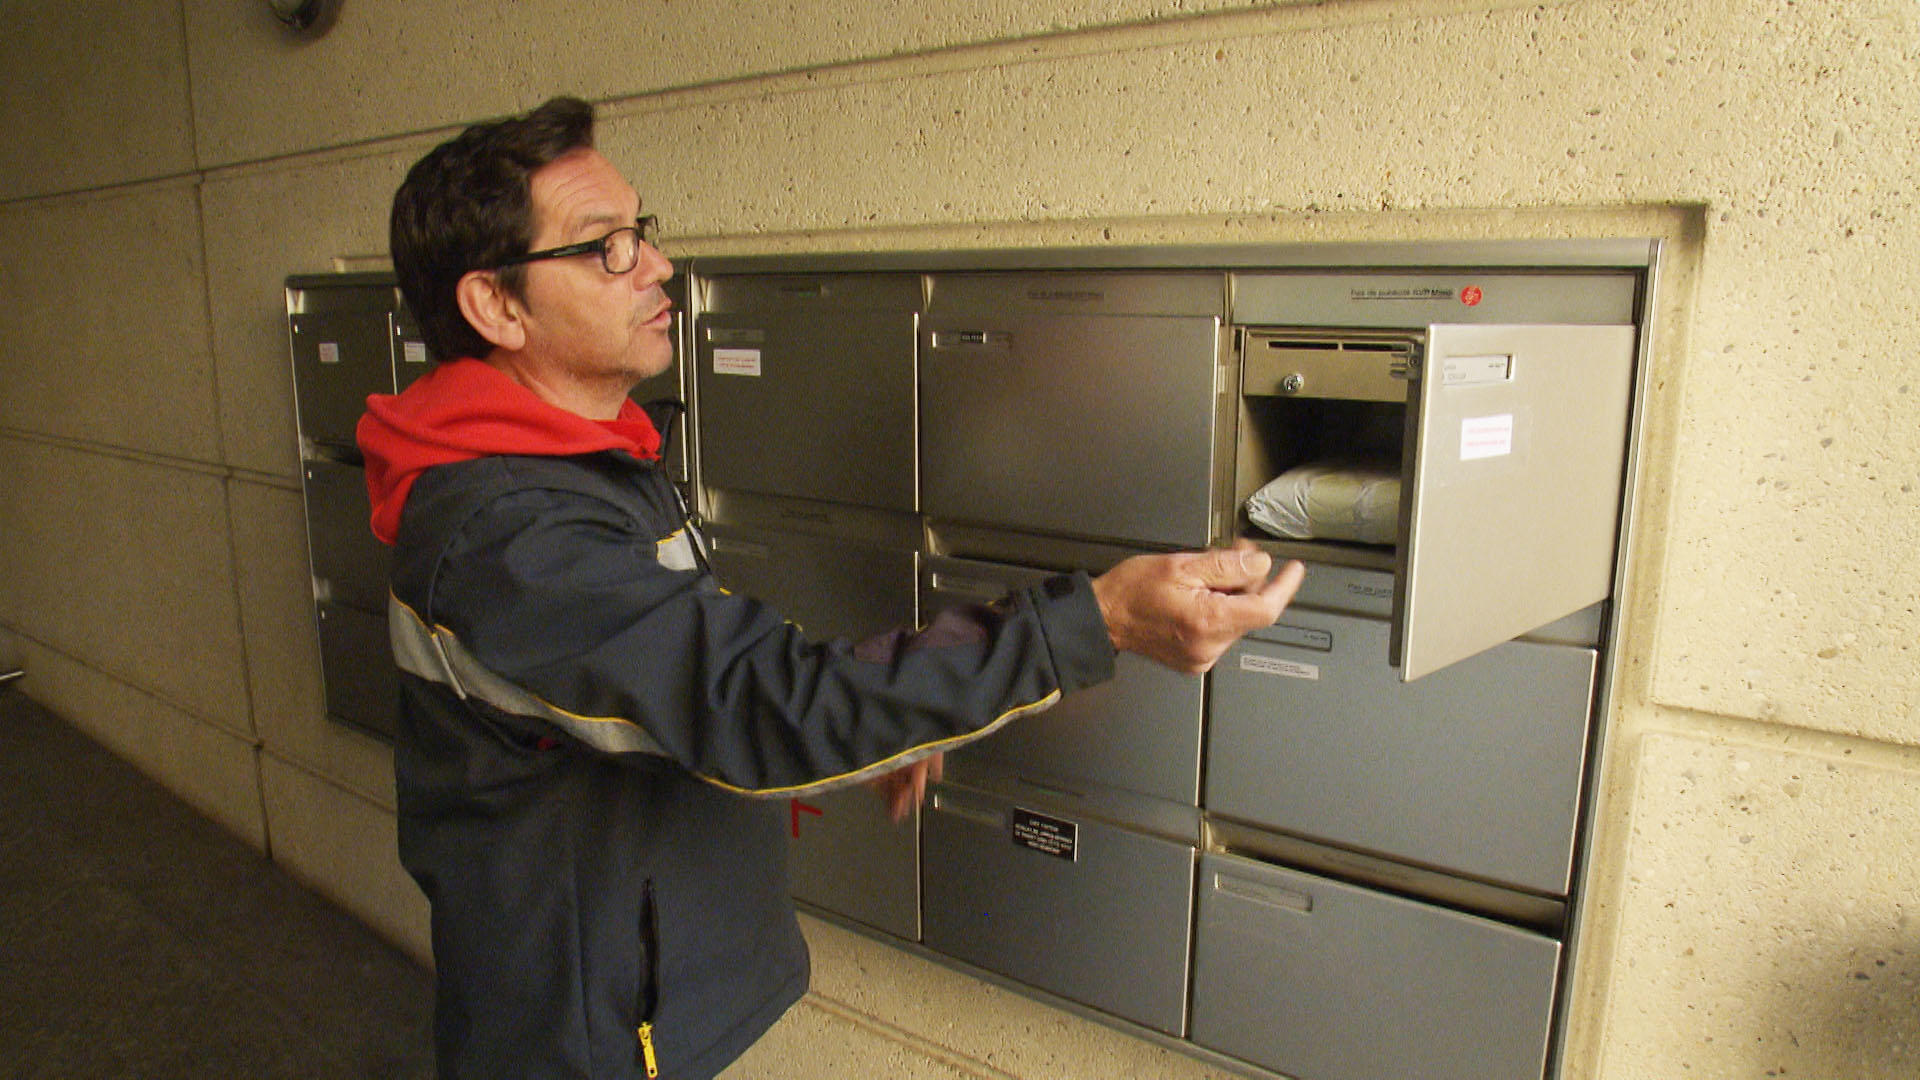 postman opens parcel section of letter box